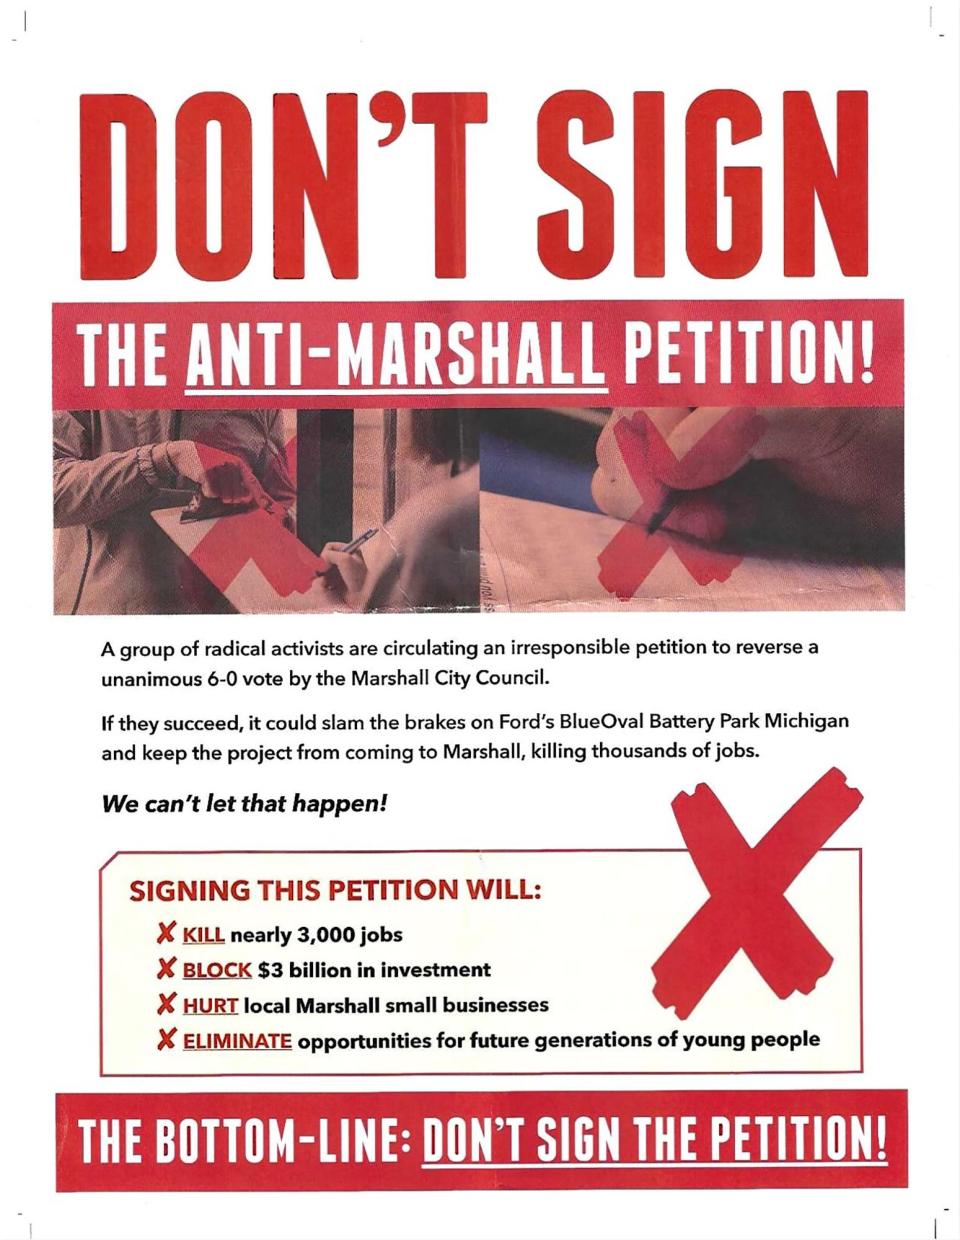 Flyers sent by a political organization that supports the Ford project near Marshall attack local opponents. The money used to pay for the ads comes from a shadowy nonprofit with ties to Michigan Democrats — allies of Gov. Gretchen Whitmer, a key champion of the project.
(Credit: Submitted)